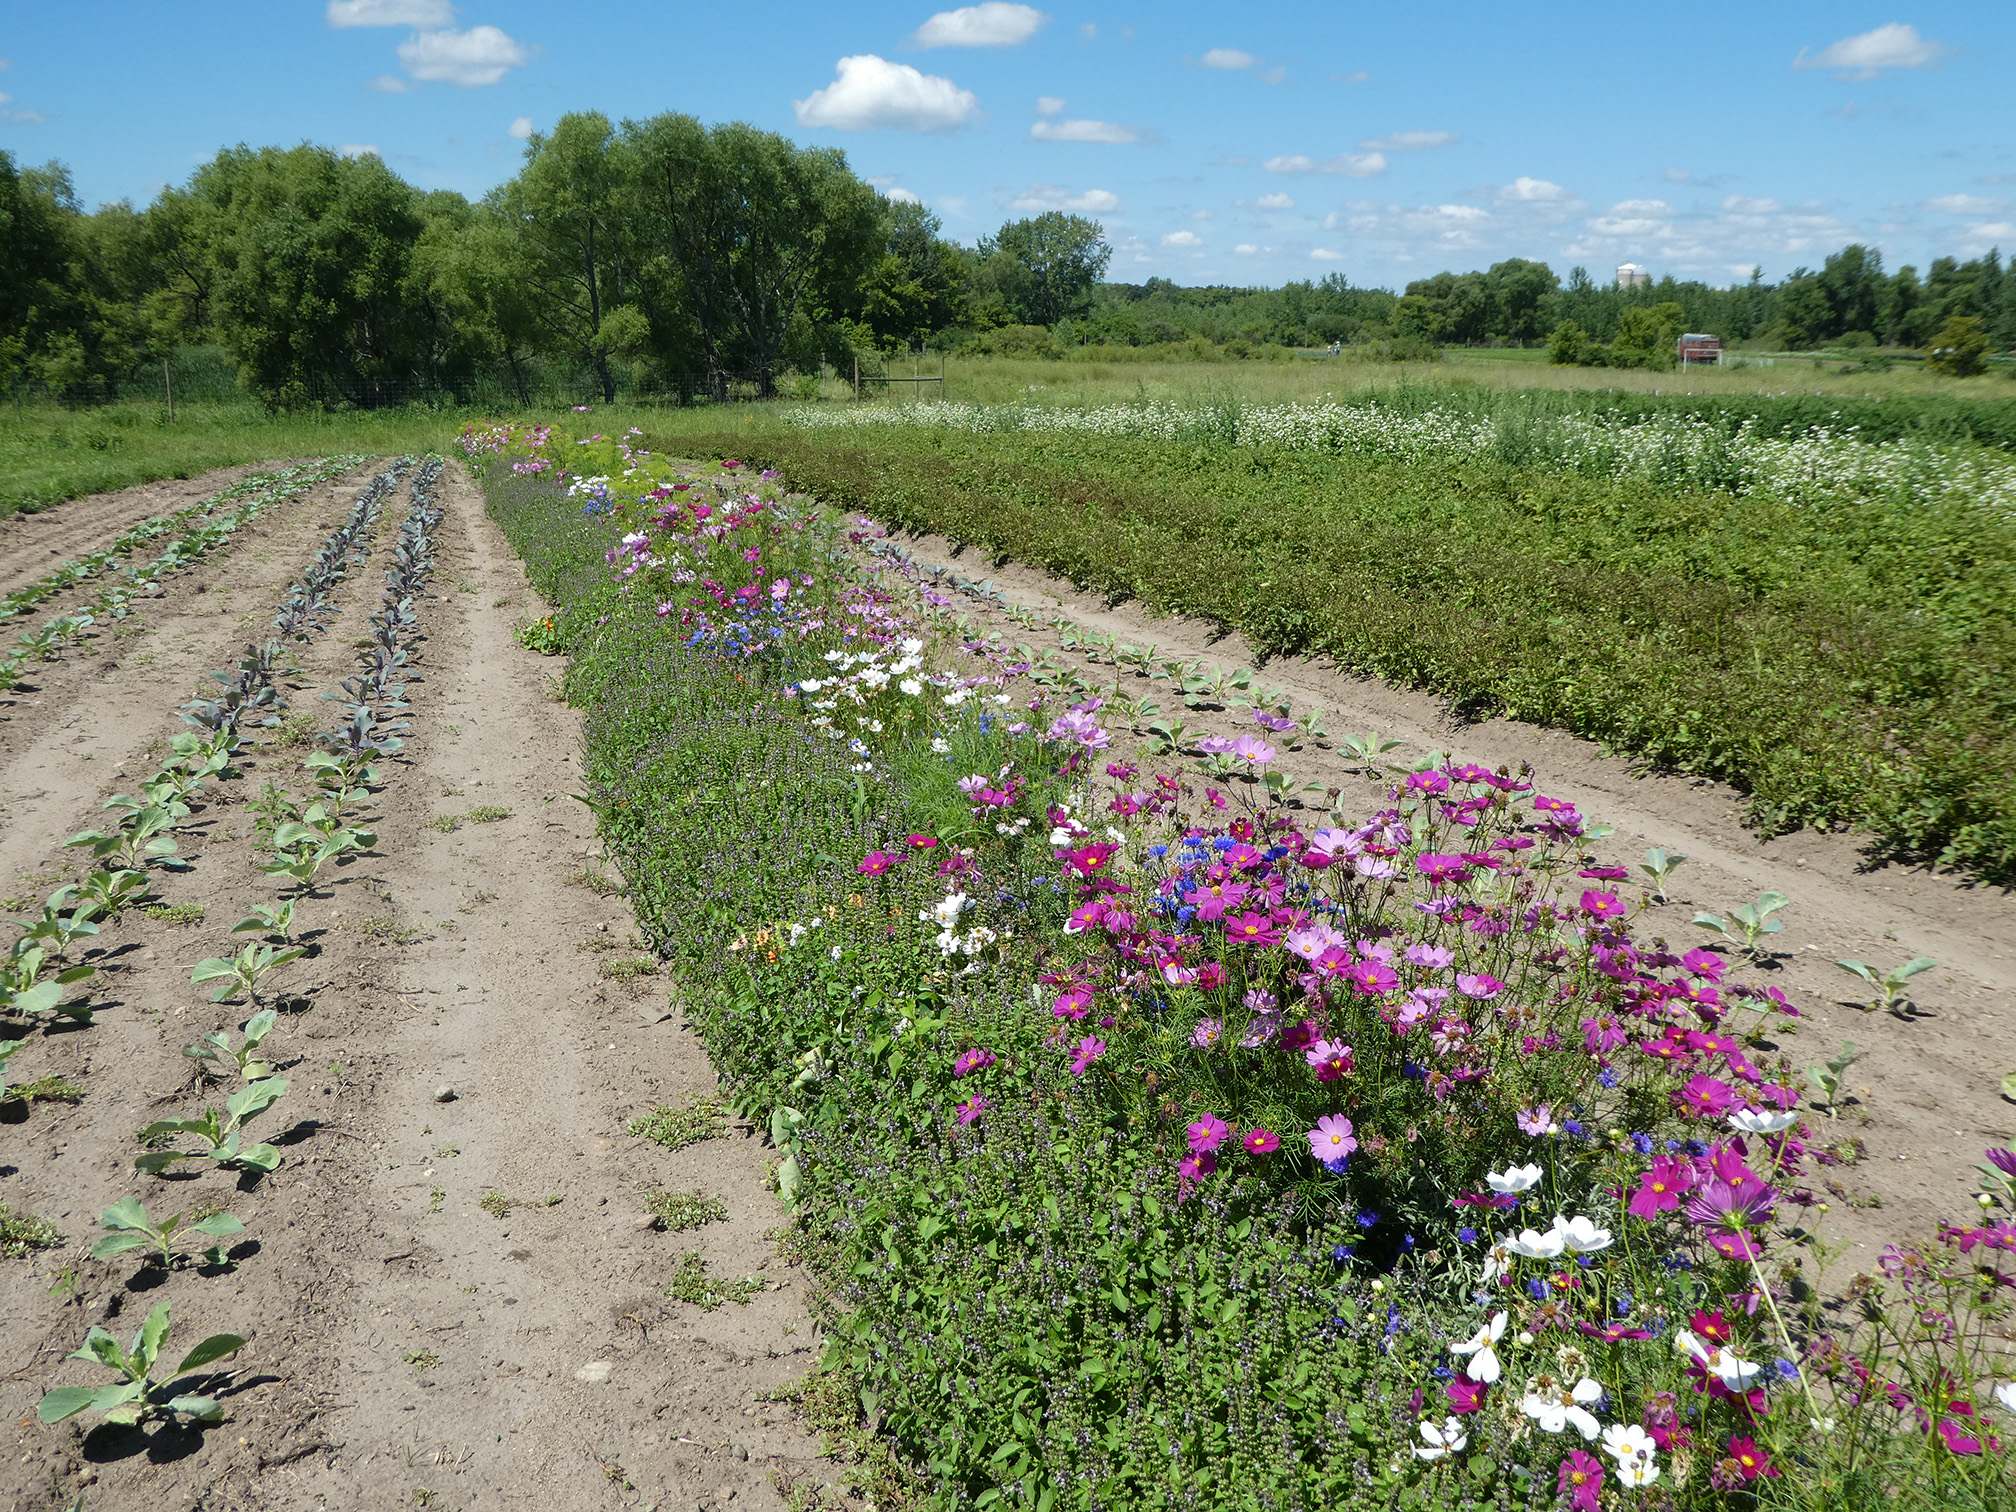 Row of vegetable plants grow in narrow strips in the brown soil either side of a strip of white, pink, and blue flowers. In the background are trees 